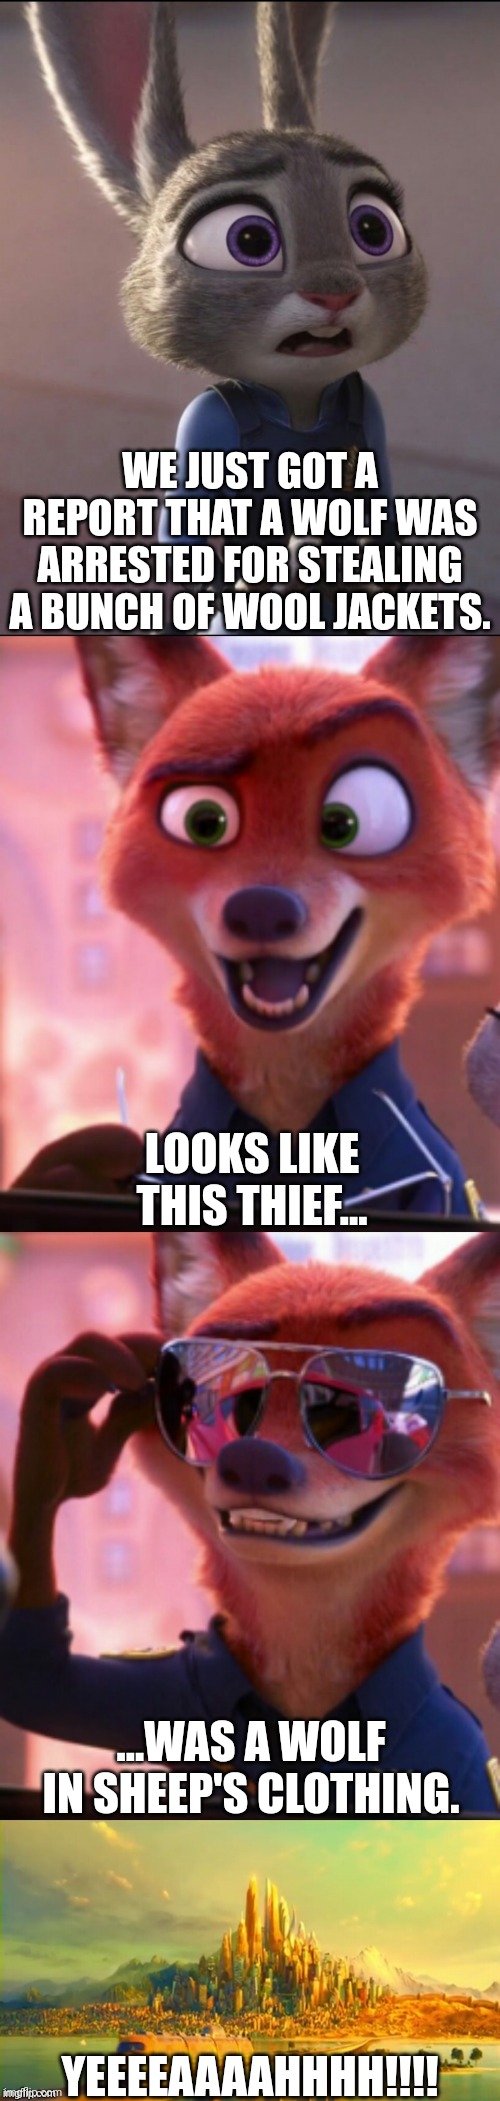 CSI: Zootopia 34 |  WE JUST GOT A REPORT THAT A WOLF WAS ARRESTED FOR STEALING A BUNCH OF WOOL JACKETS. LOOKS LIKE THIS THIEF... ...WAS A WOLF IN SHEEP'S CLOTHING. YEEEEAAAAHHHH!!!! | image tagged in csi zootopia,zootopia,judy hopps,nick wilde,parody,funny | made w/ Imgflip meme maker